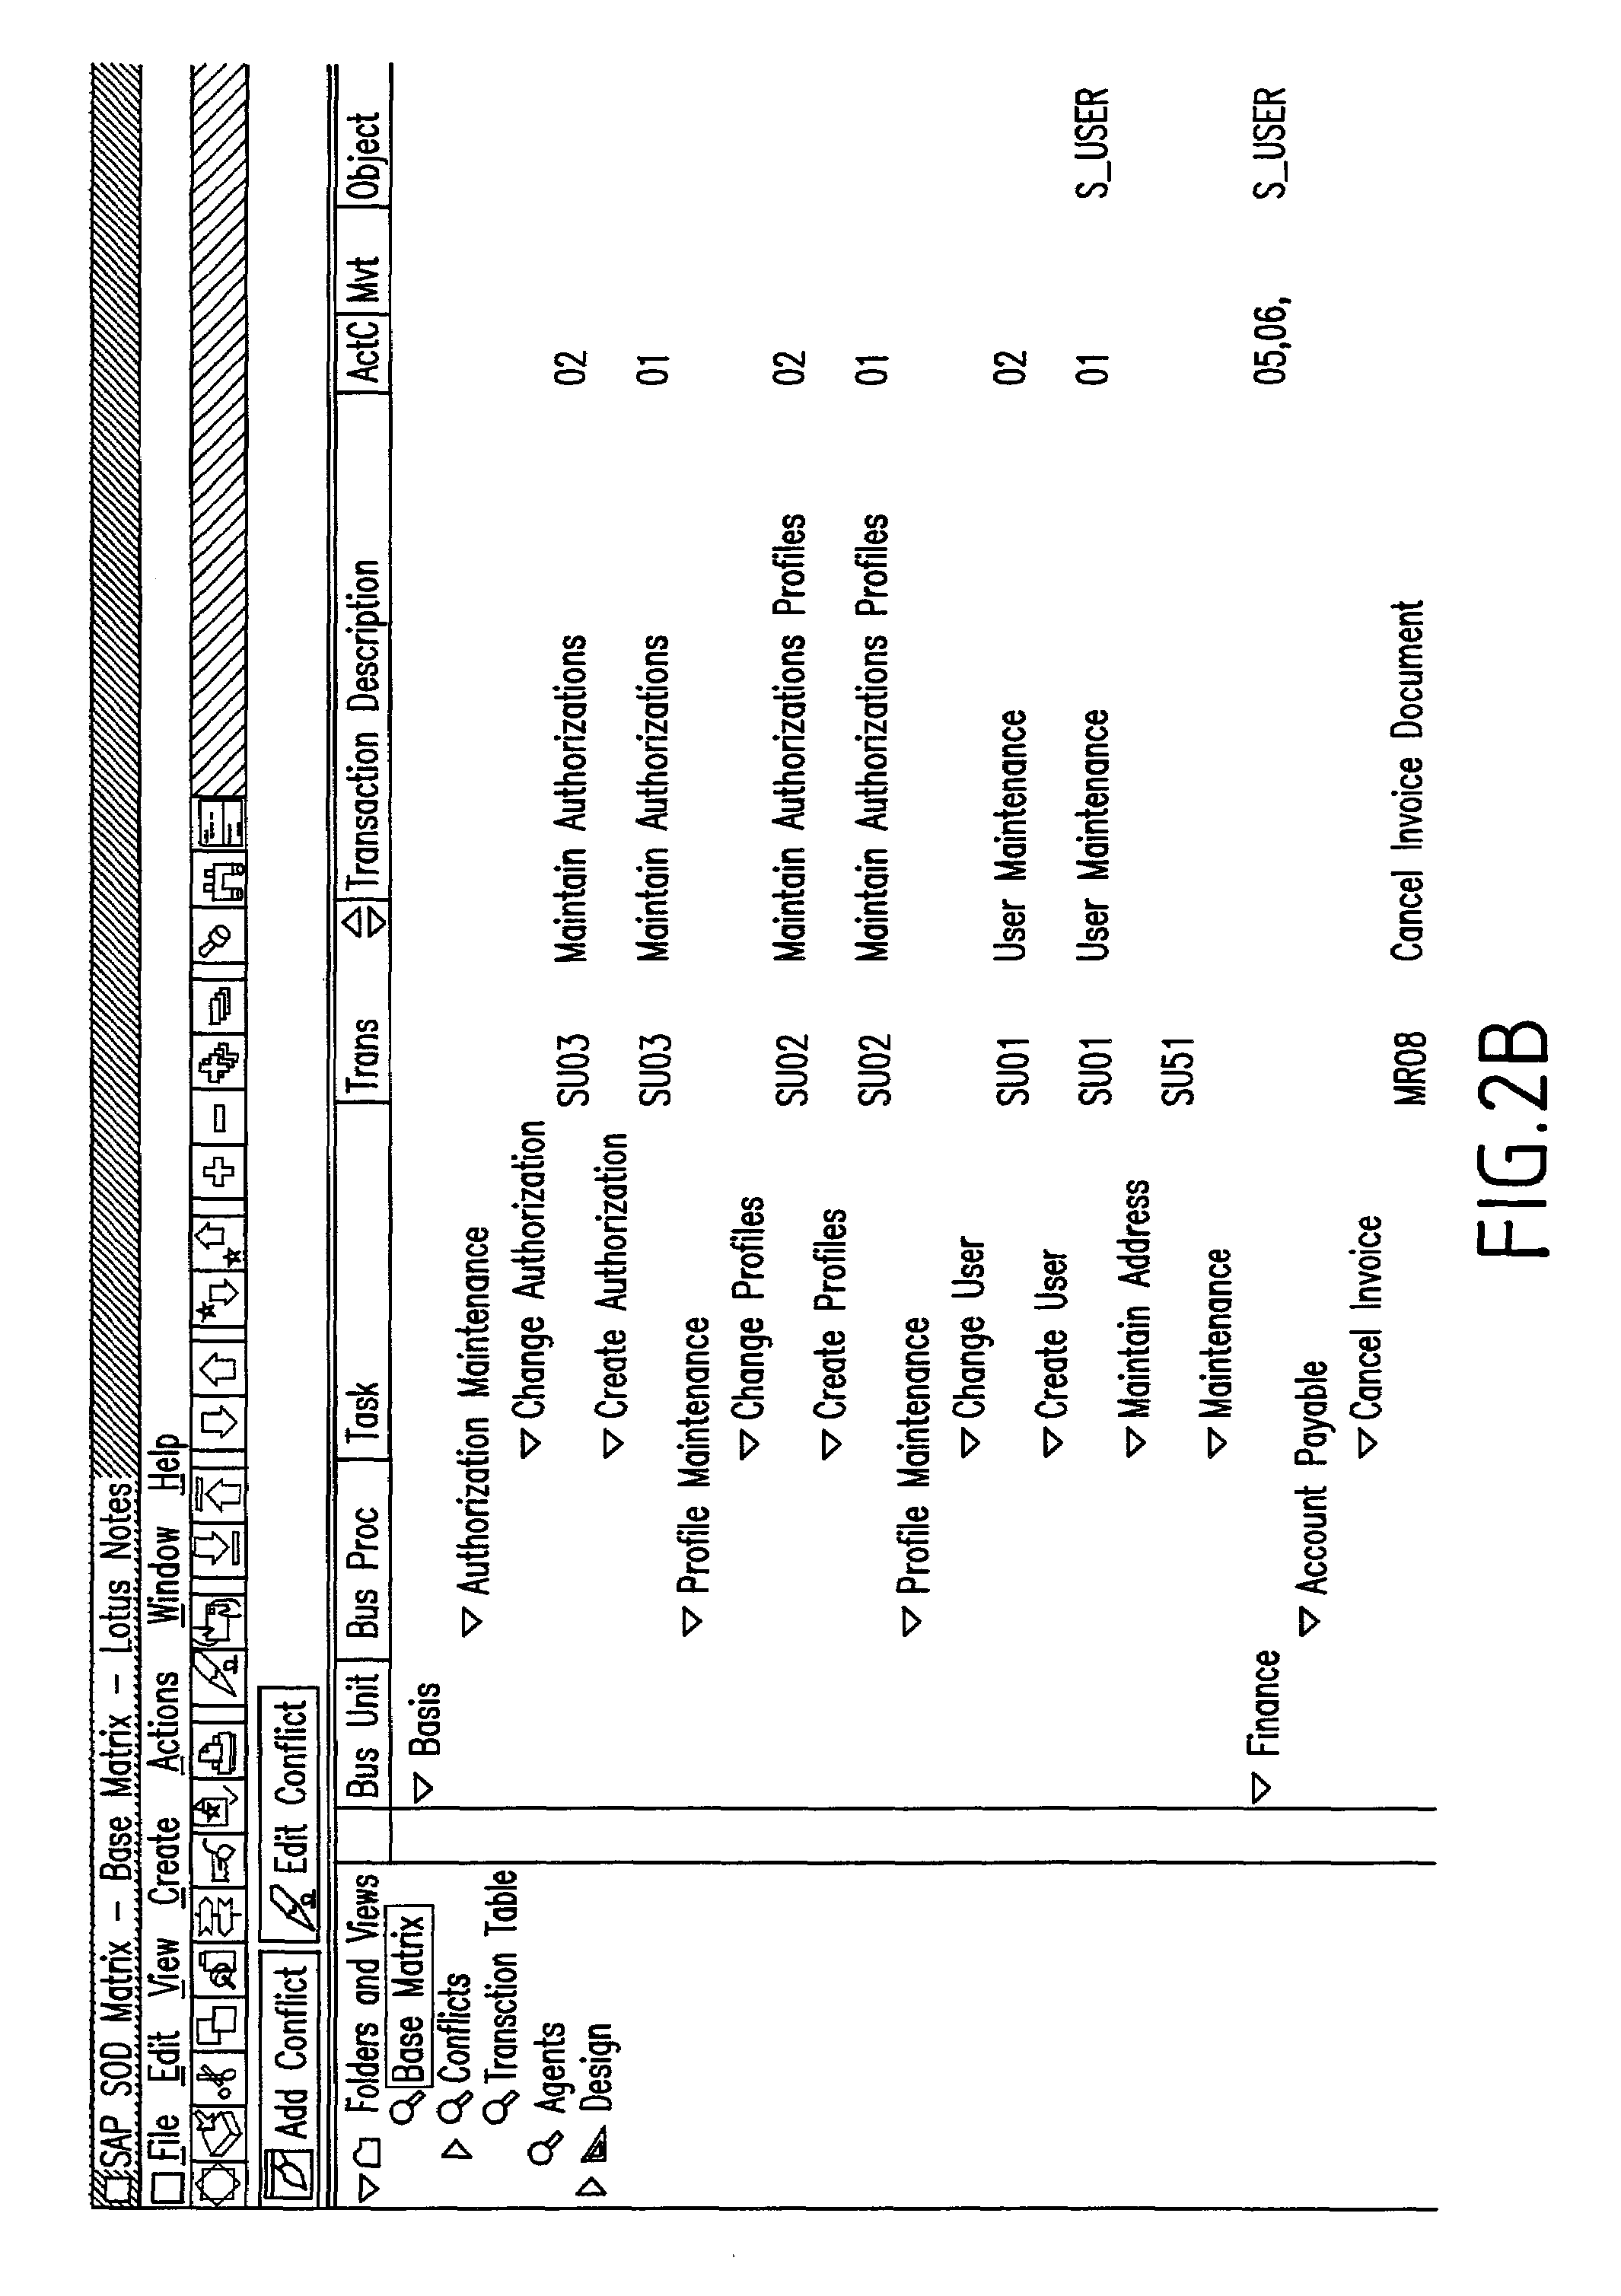 Separations-of-duties analysis tool for object-oriented integrated enterprise wide computing applications